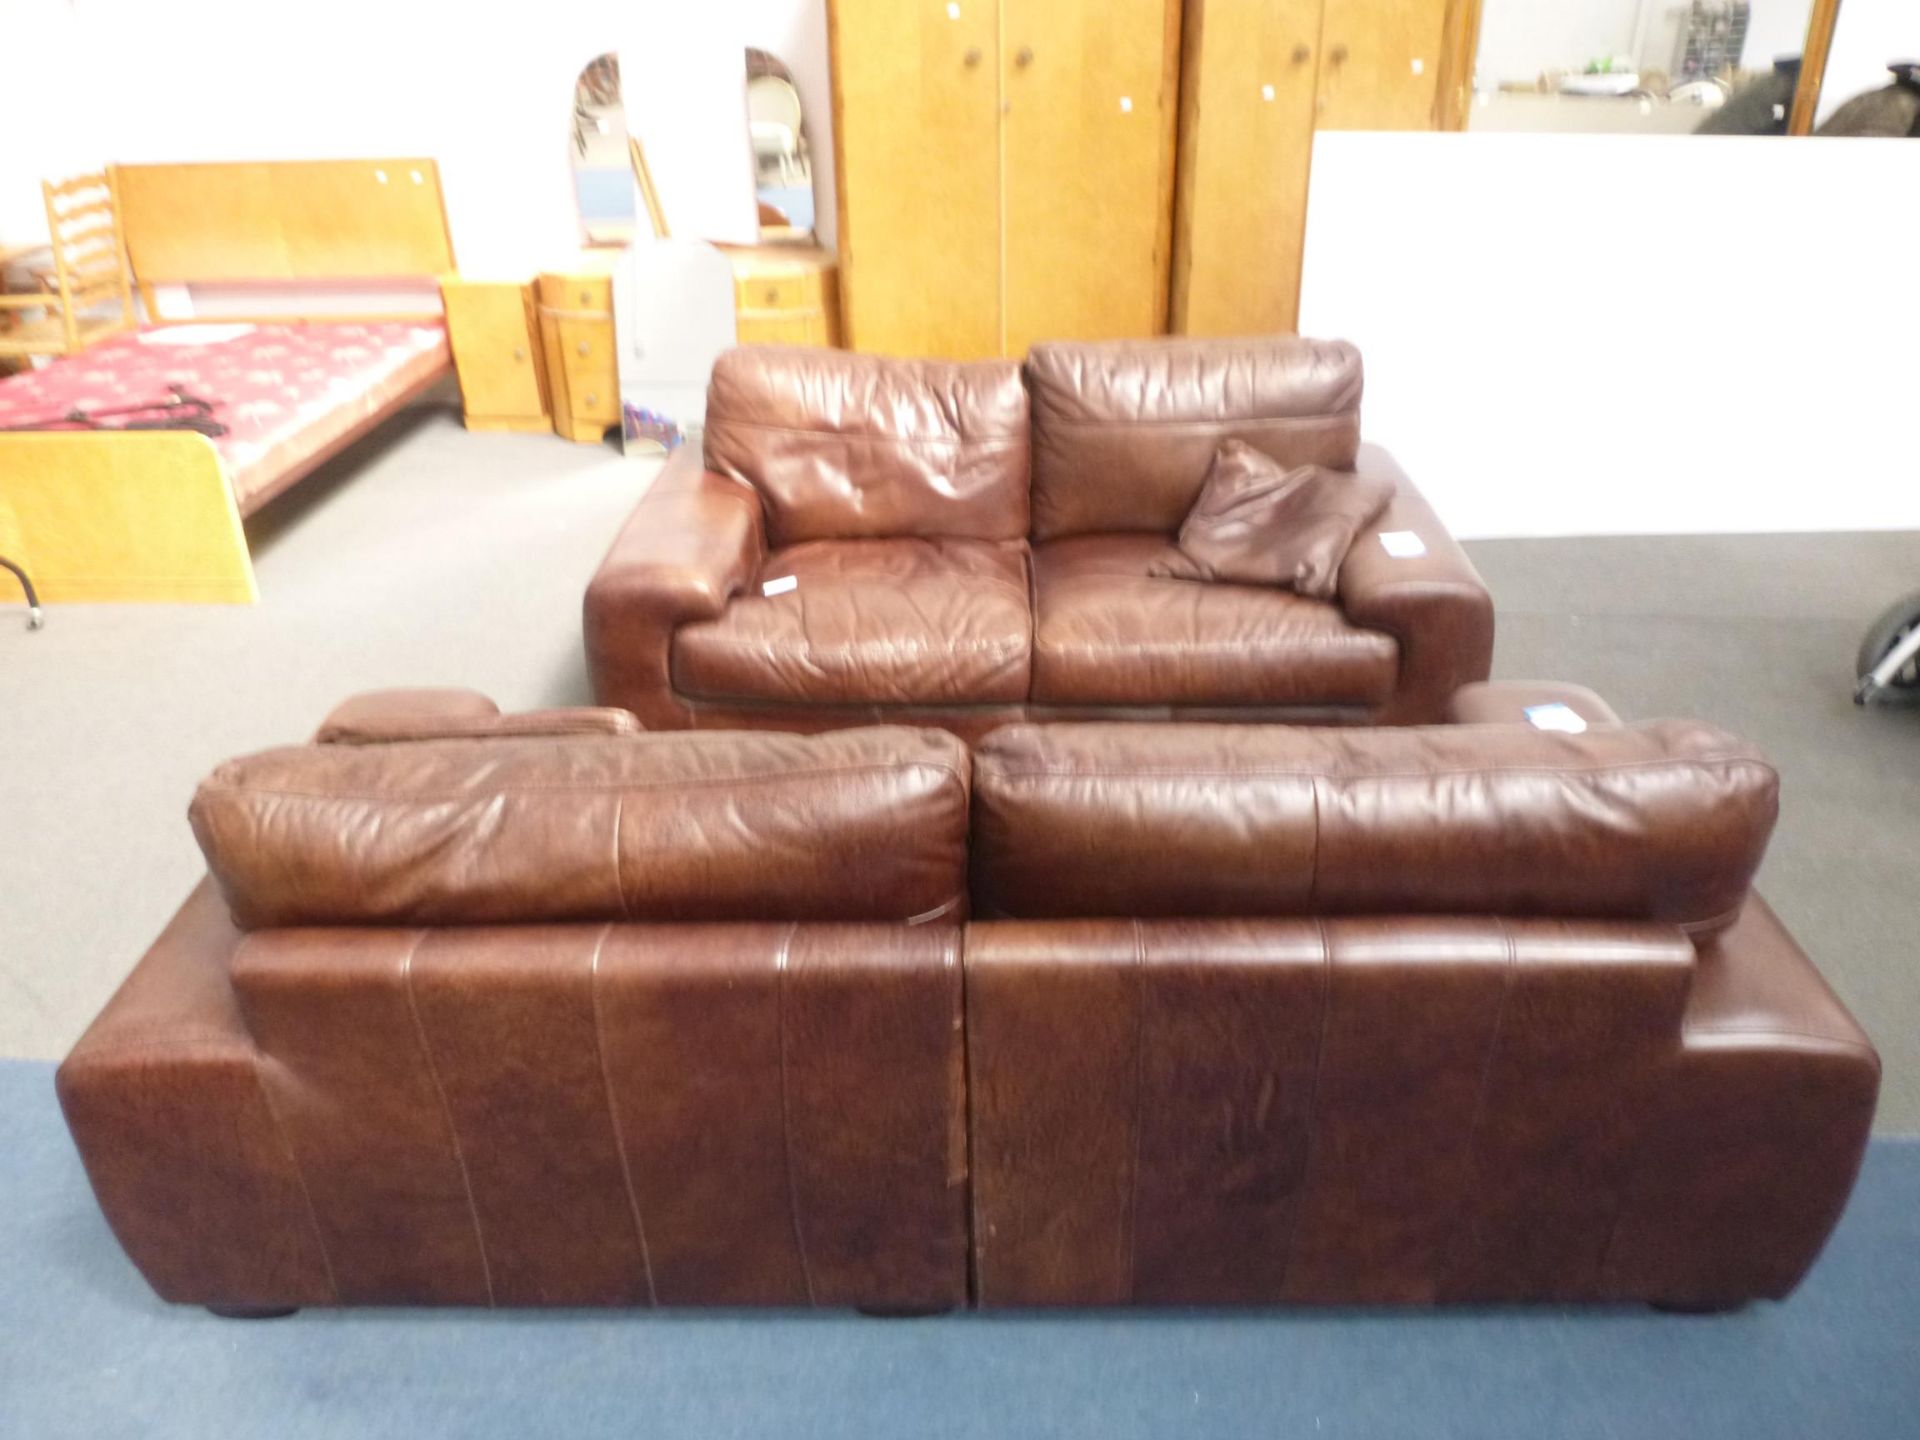 2 x Large Brown Leather Settee's. A 2 Seat and a 3 Seat (est. £150-£180) - Image 2 of 5